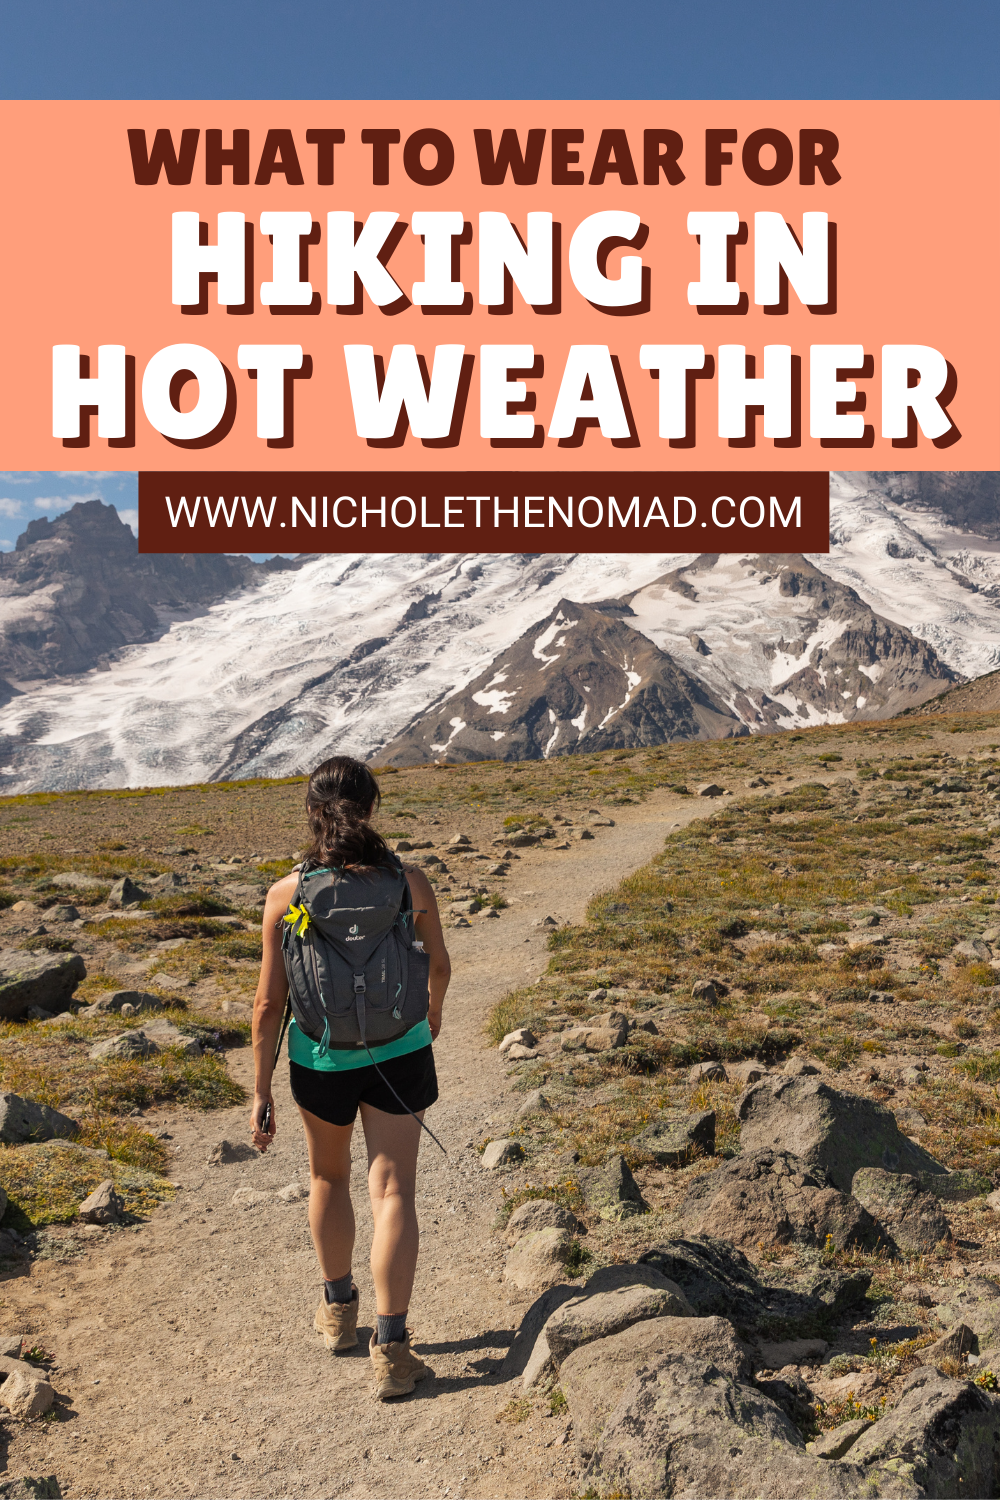 Can You Wear Tank Tops To Hike?